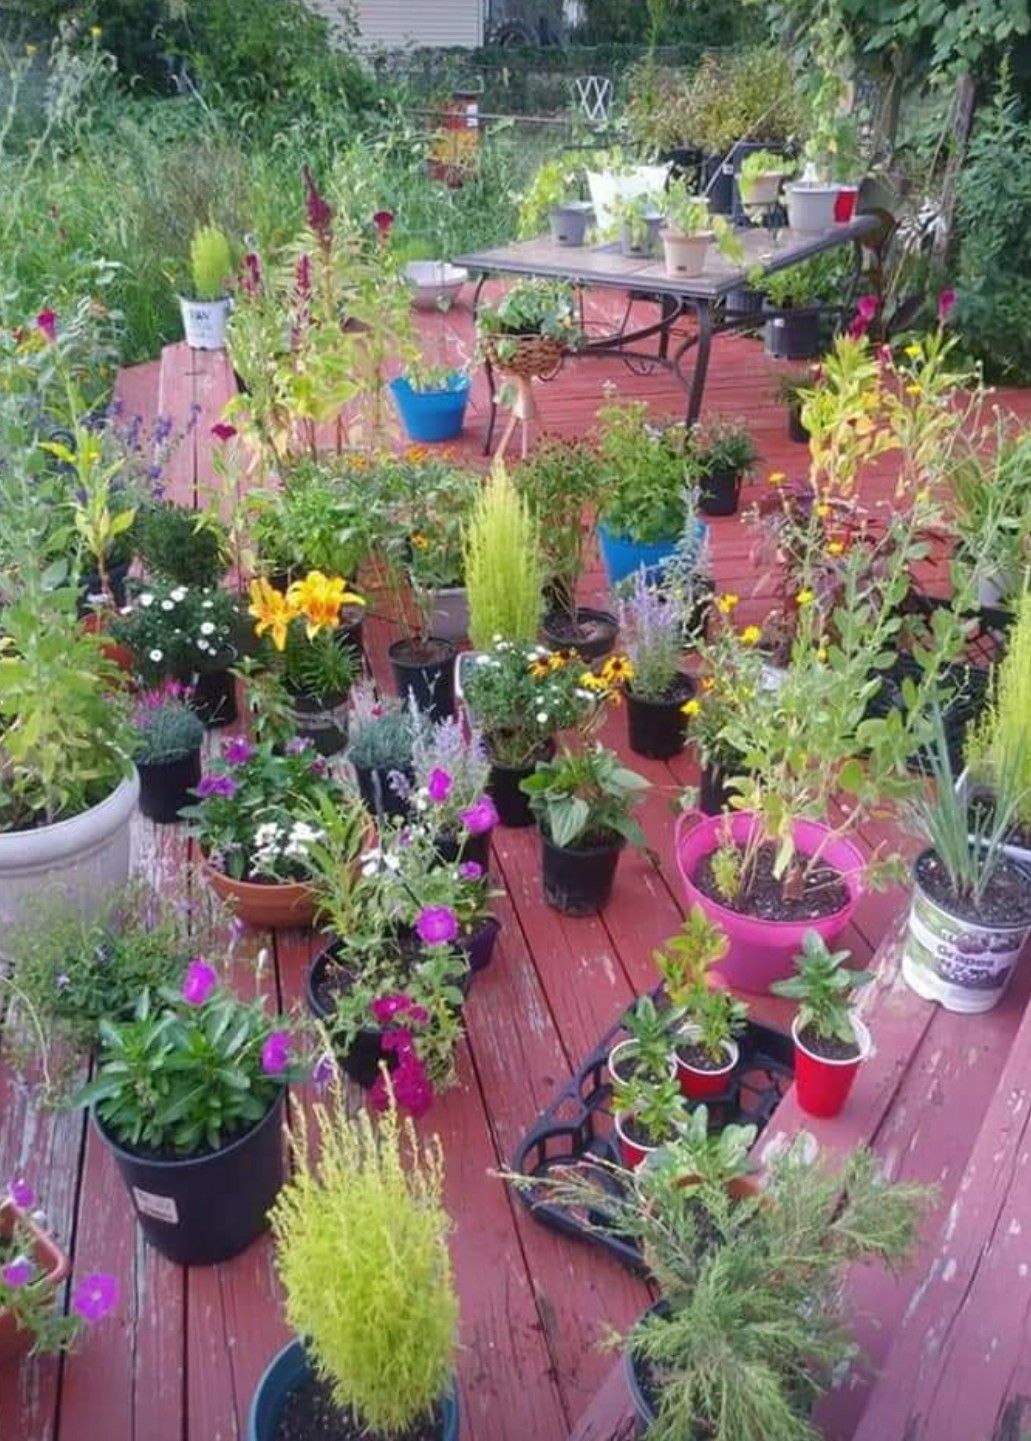 Half price plants 🌷for sale Sep 13,14,15 from 10-5 at 163 River City Blvd 63125